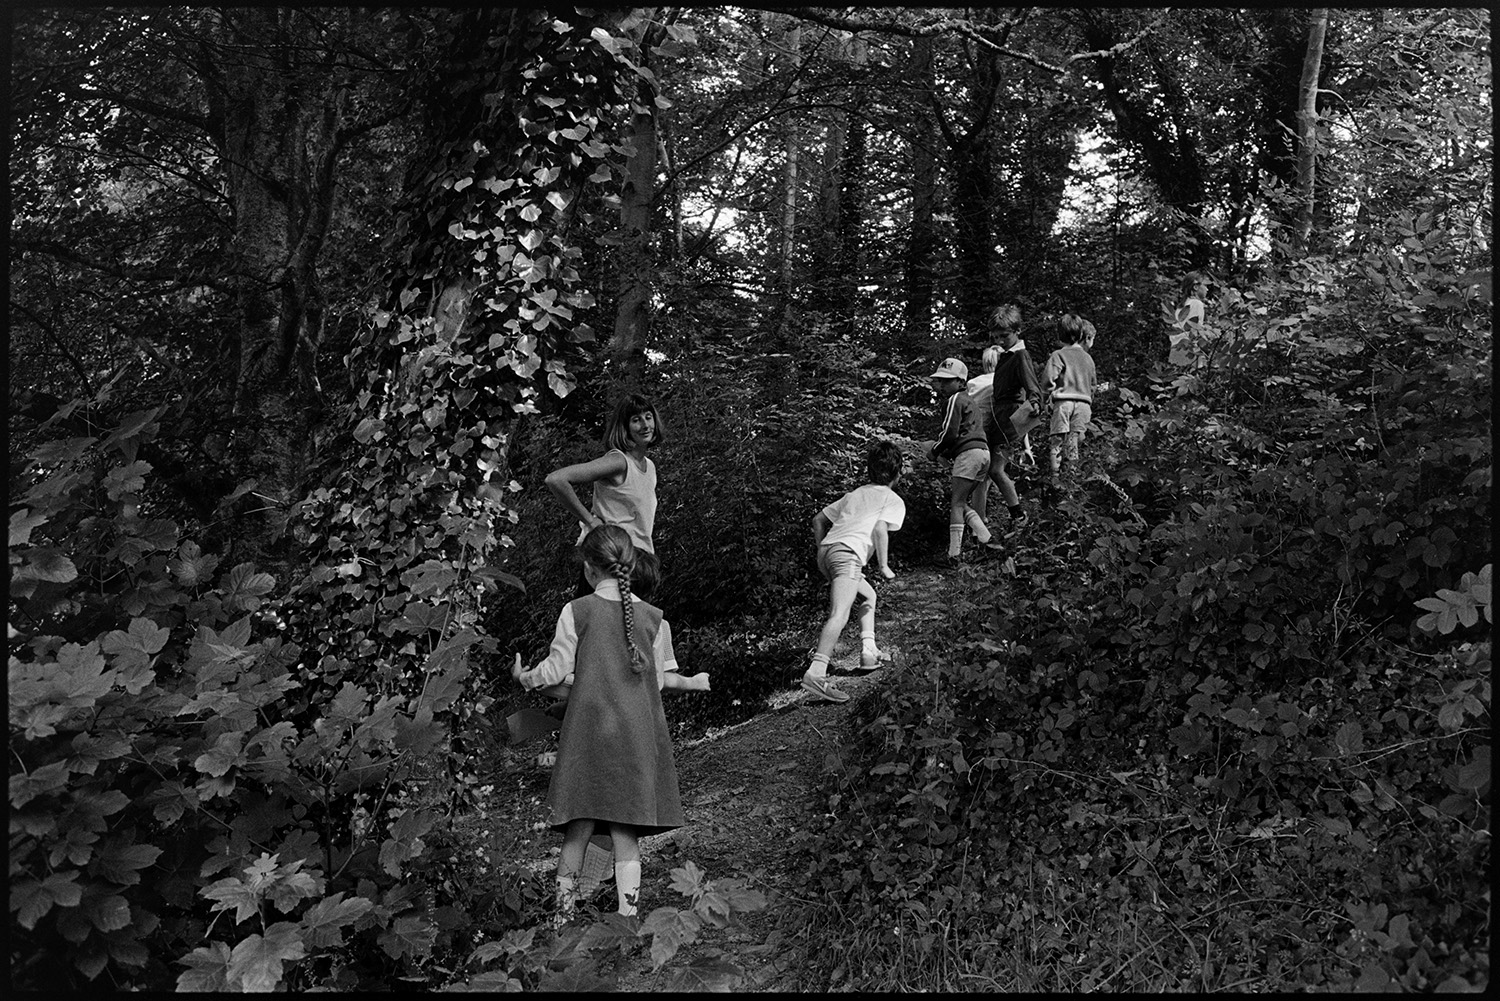 Brownies in school playground. Children in class setting off on nature walk on wood.
[Rowena Hoare, teacher at Chulmleigh Primary School, with children walking up a steep path in the woods at Chulmleigh, on a nature walk.]